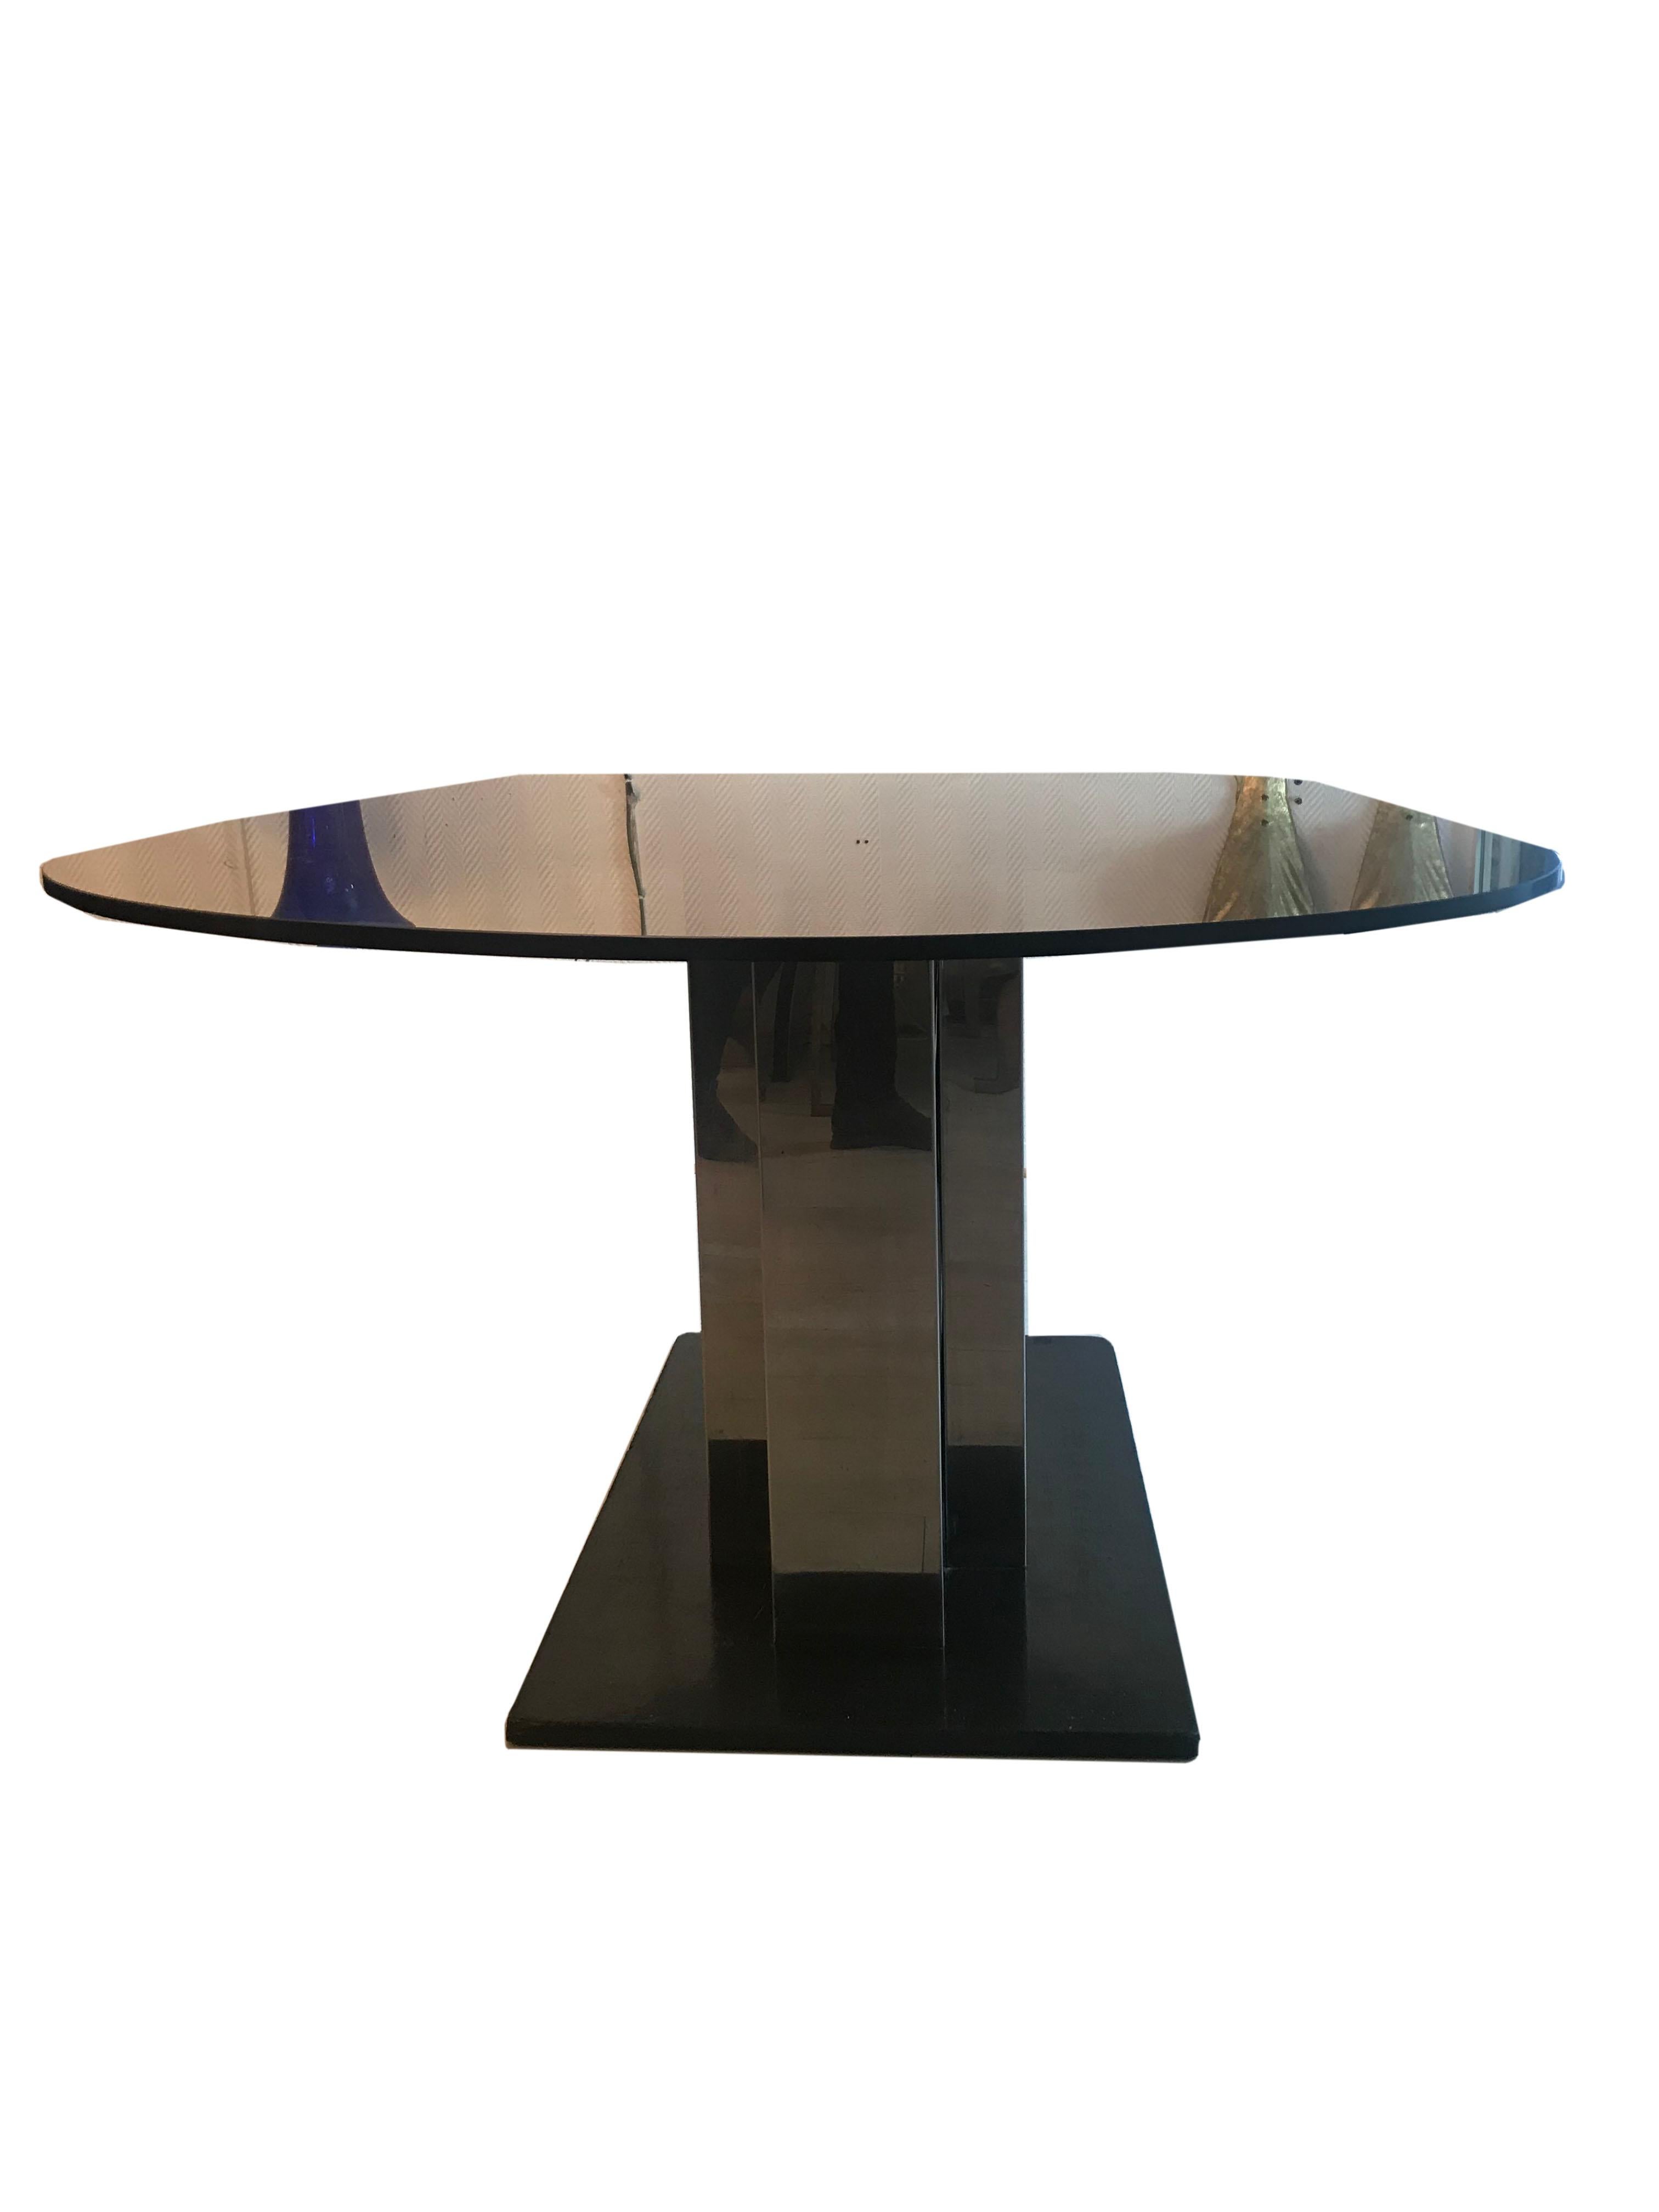 Console table by François Monnet
circa 1970
Measures: 190 x 106 x H 72 cm
Glass, stainless steel, wood.
3500 Euros.